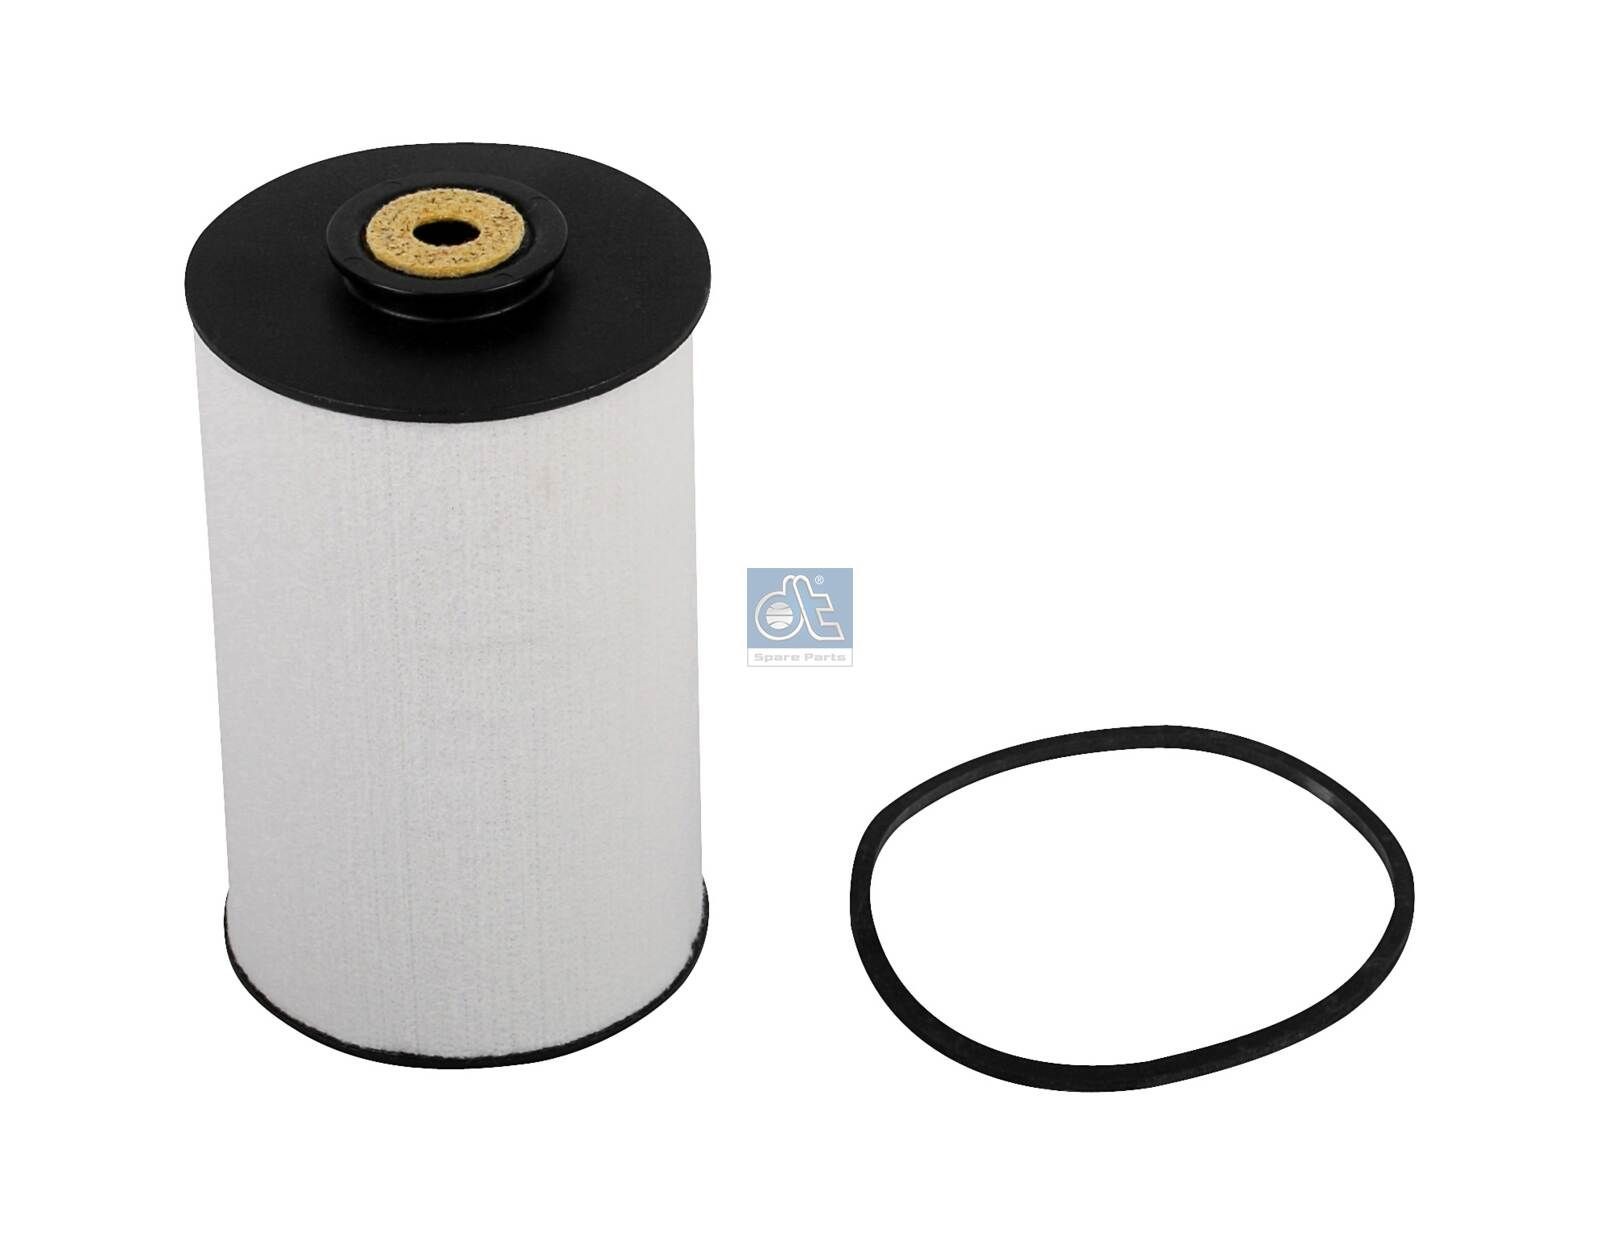 BFU 900 x DT Spare Parts 4.61531 Fuel filter 740 2855